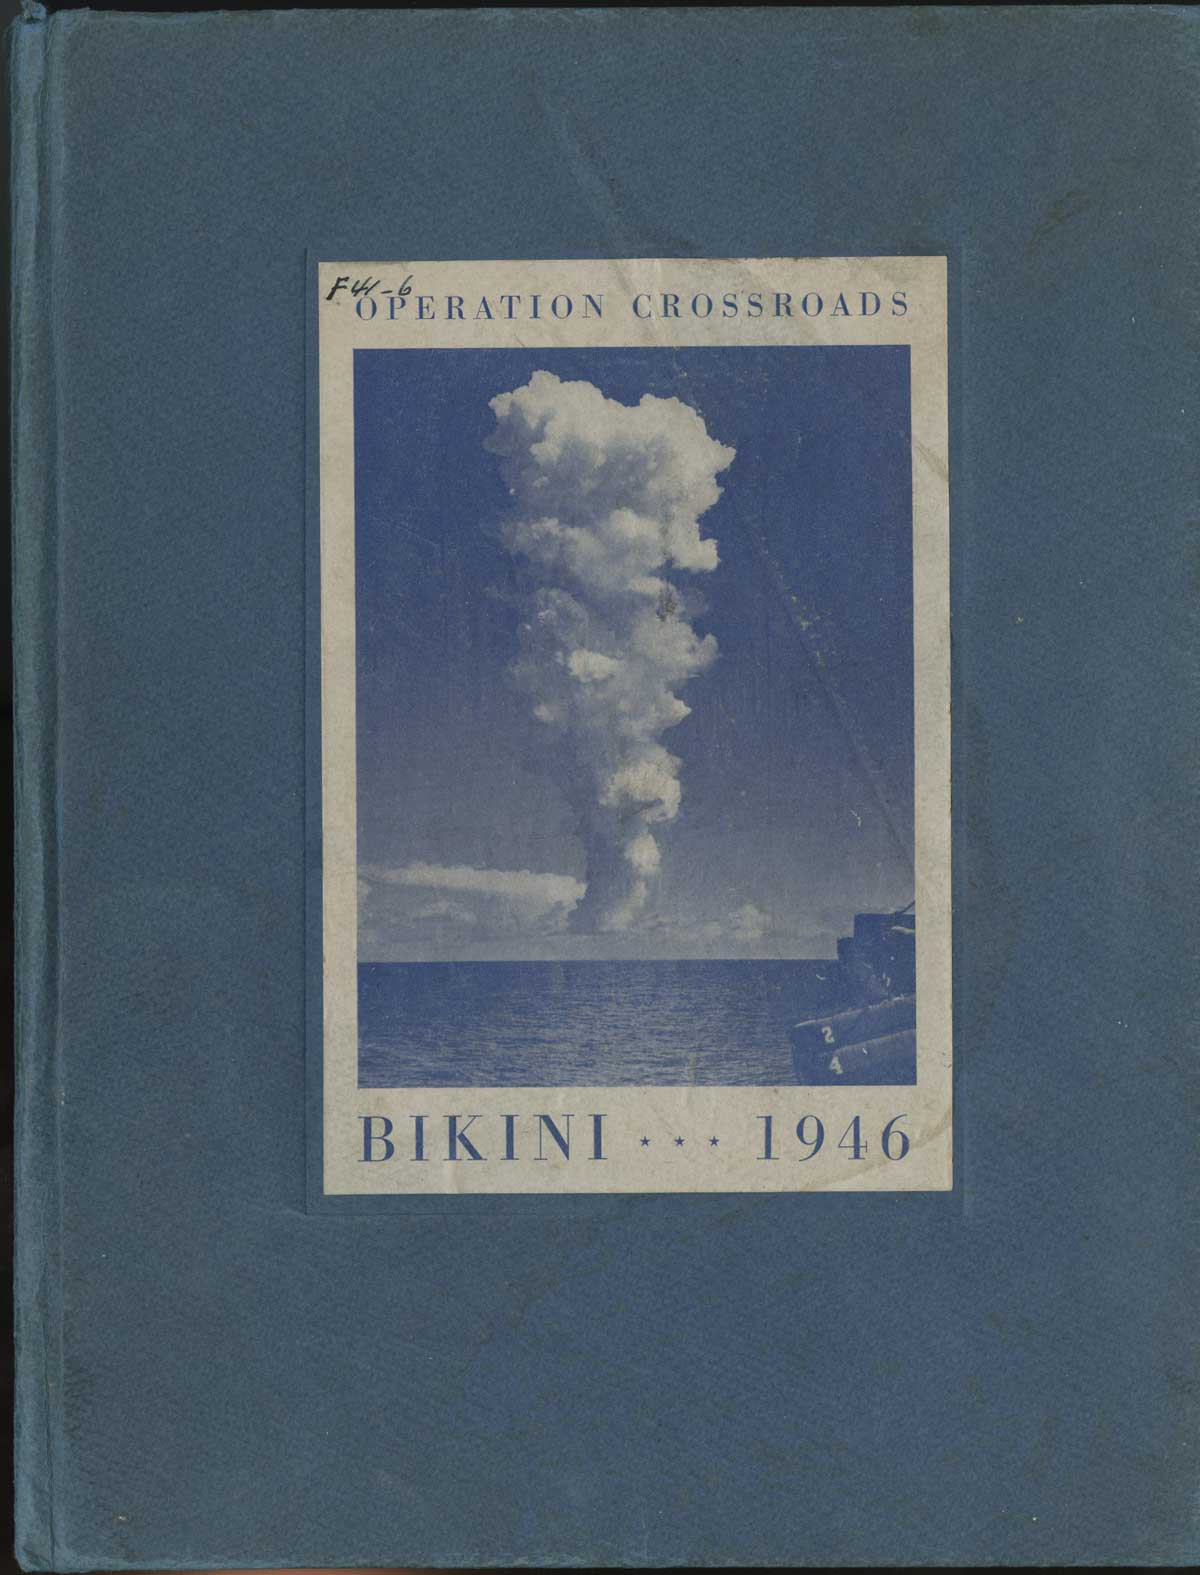 Blue book cover with title "Operation Crossroads Bikini 1946" and photo of bomb cloud on a white label